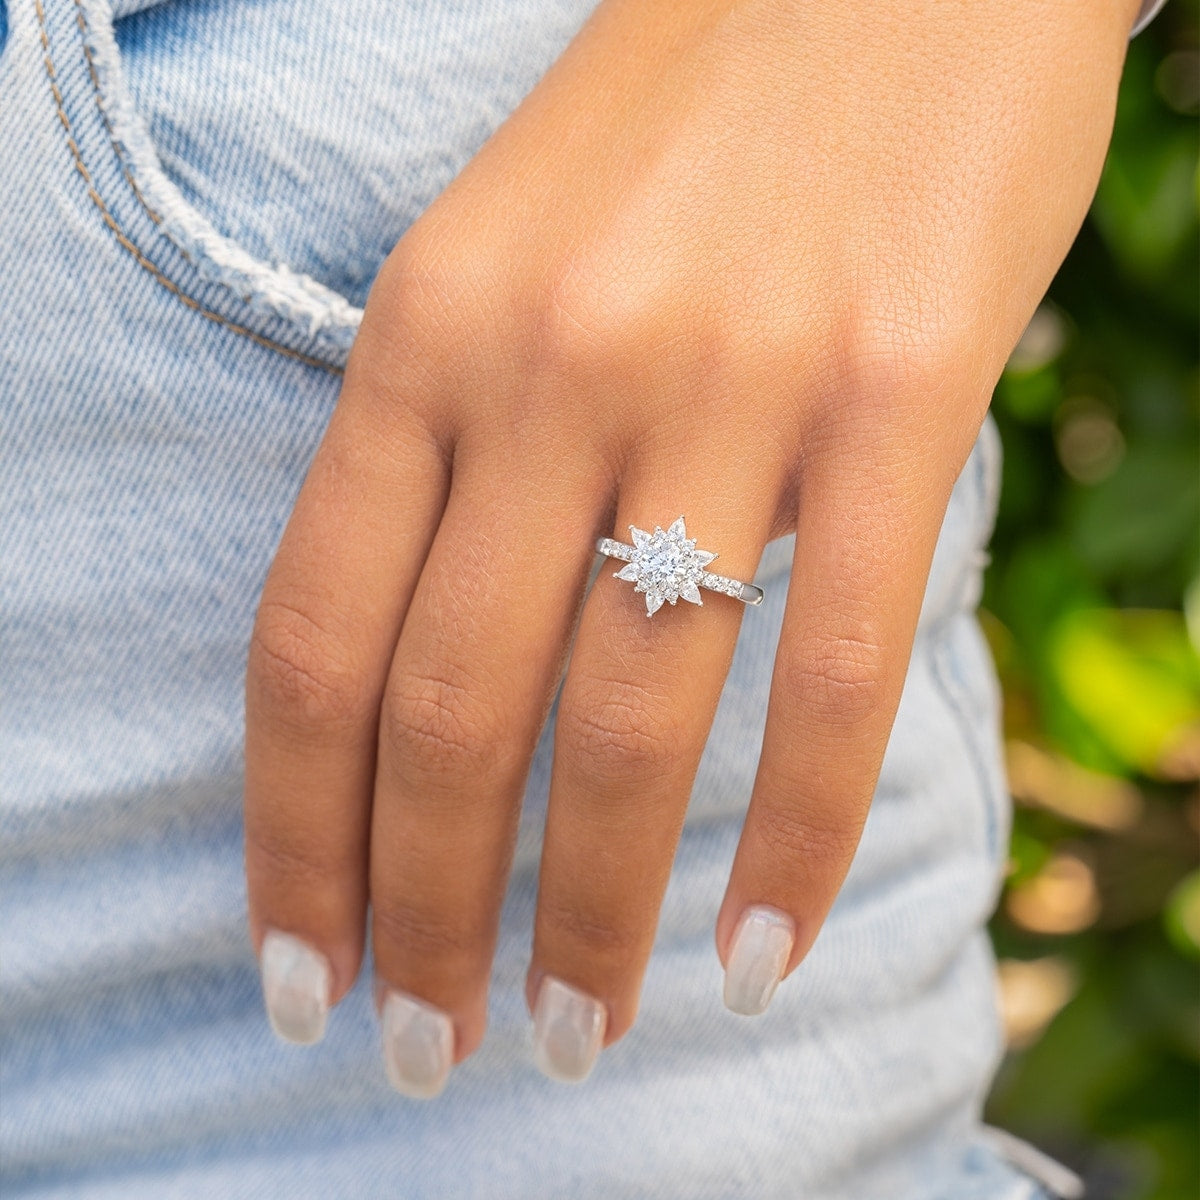 Star-like engagement ring with silver band.